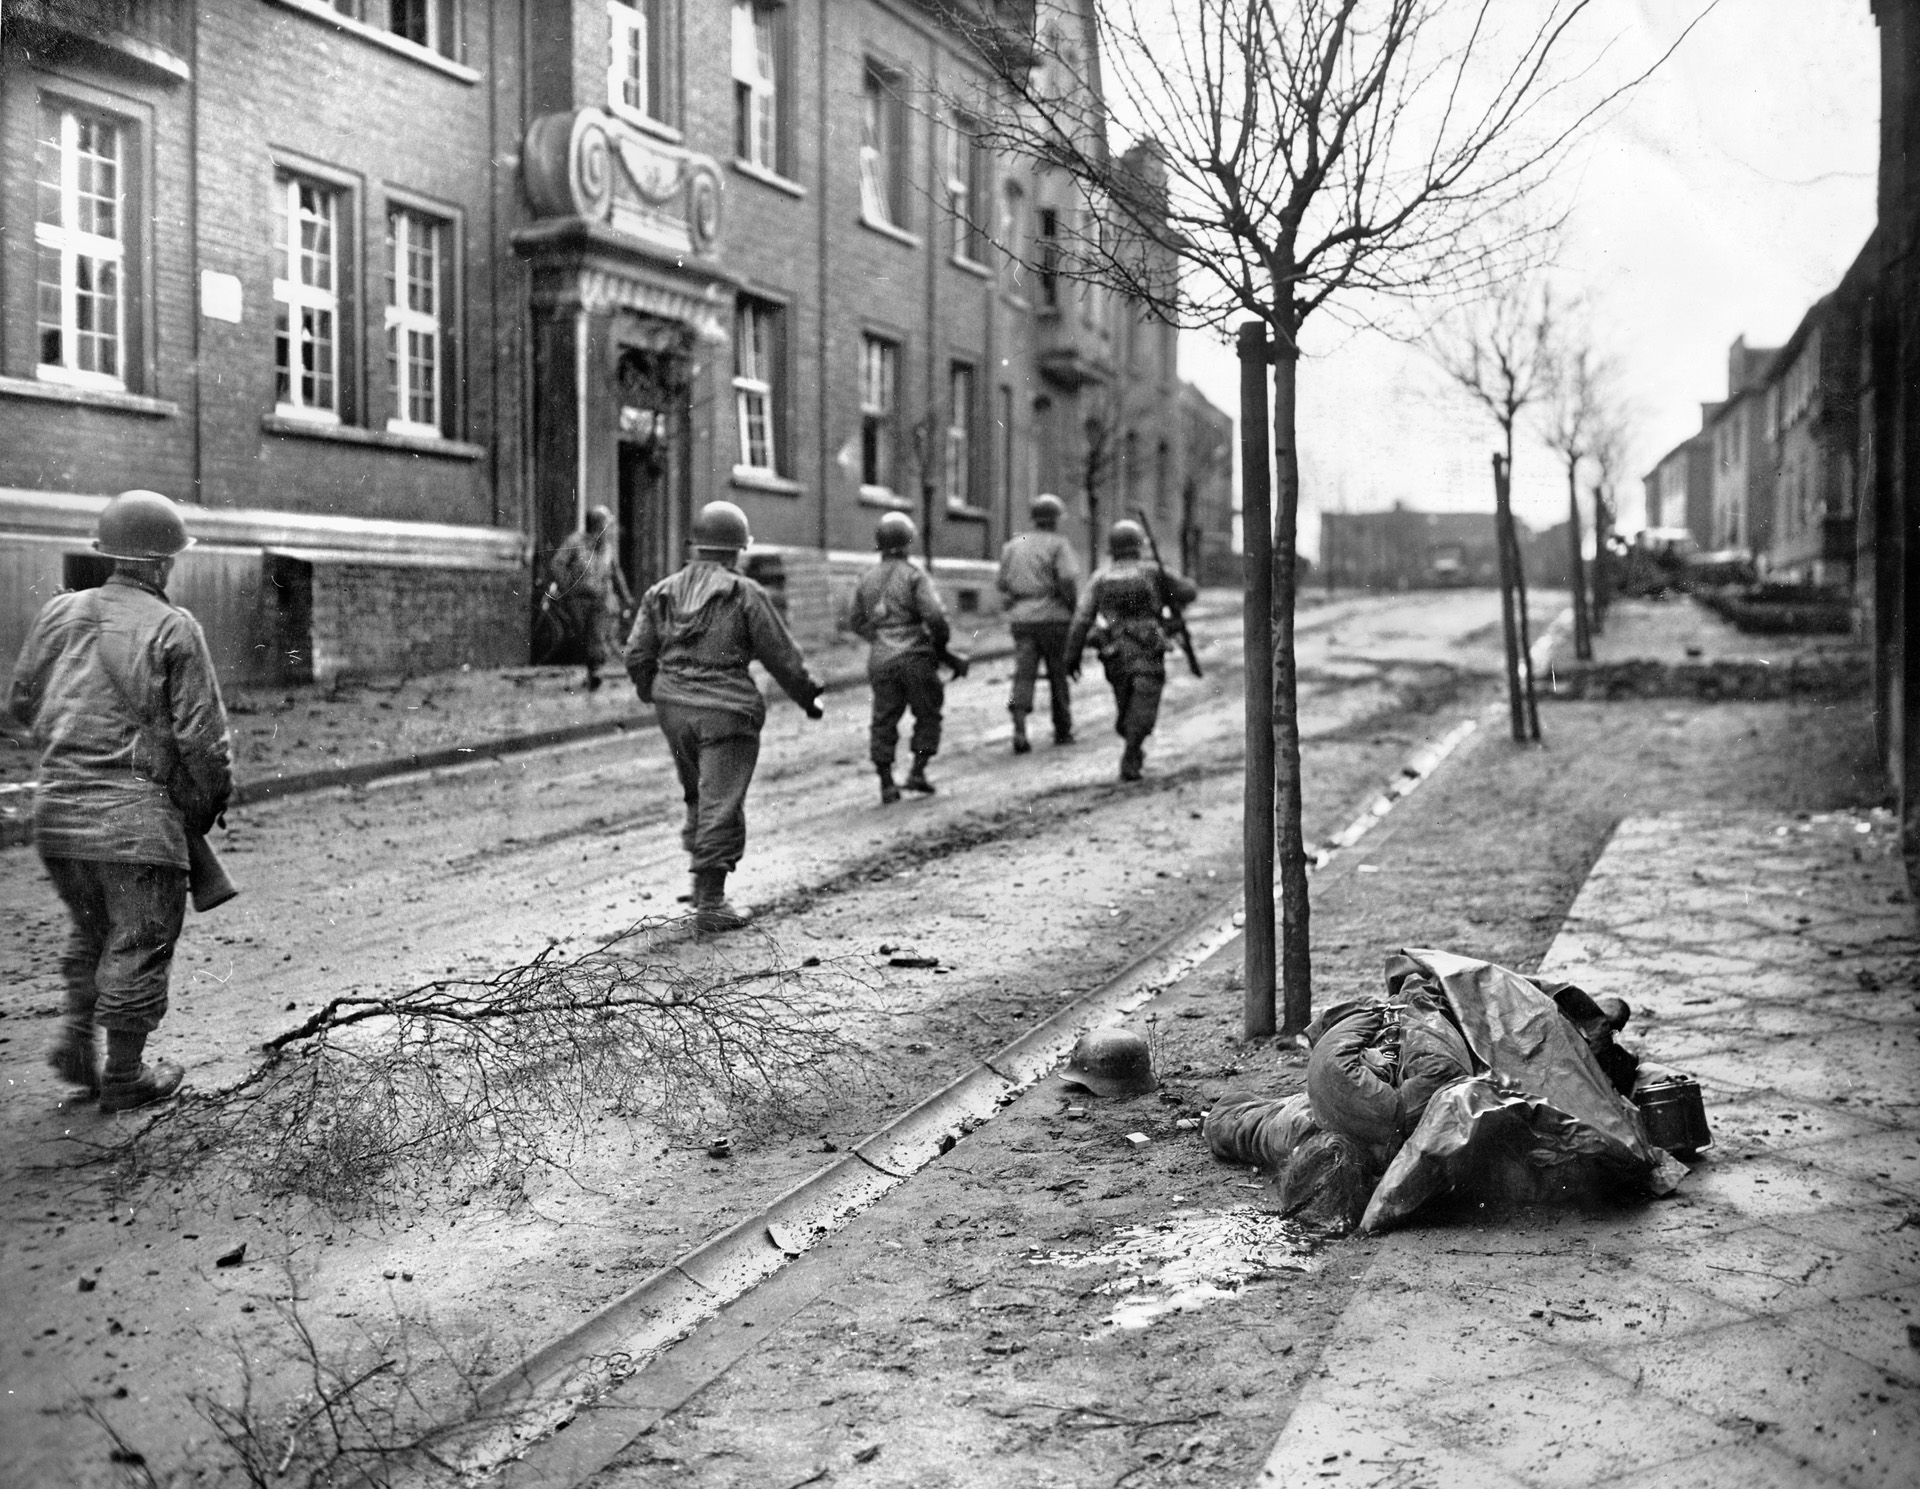 Men of the 320th Infantry Regiment, 35th Infantry Division, Ninth Army, file past the corpse of a German soldier in the German town of Kamp-Lintfort, west of Essen. 